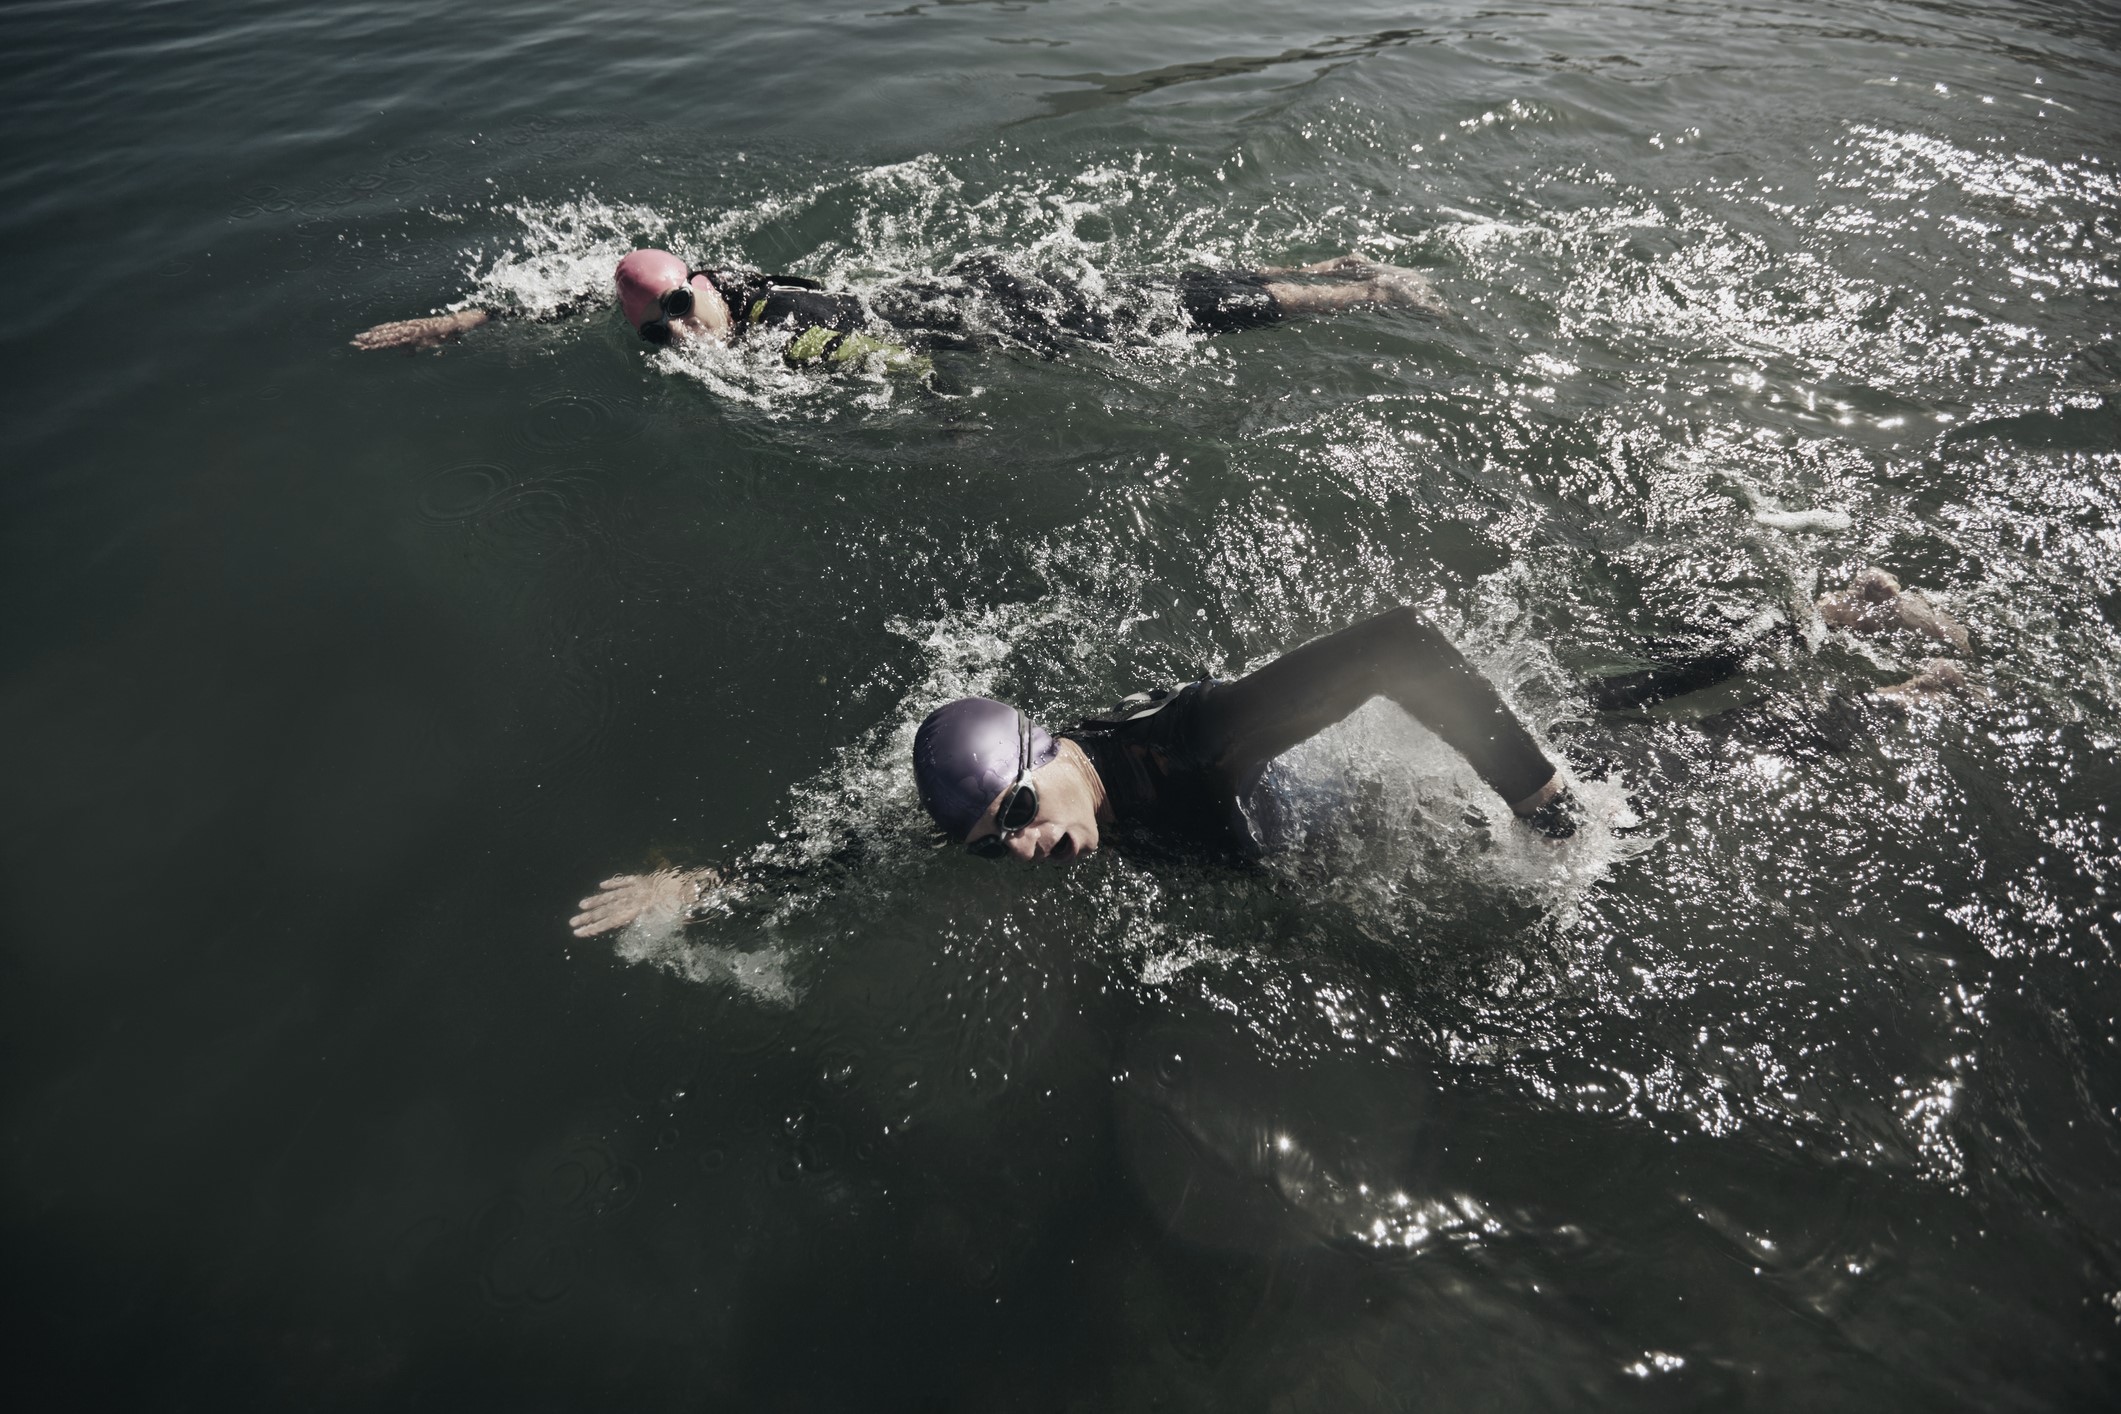 English Channel charity swim for Cancer Research UK